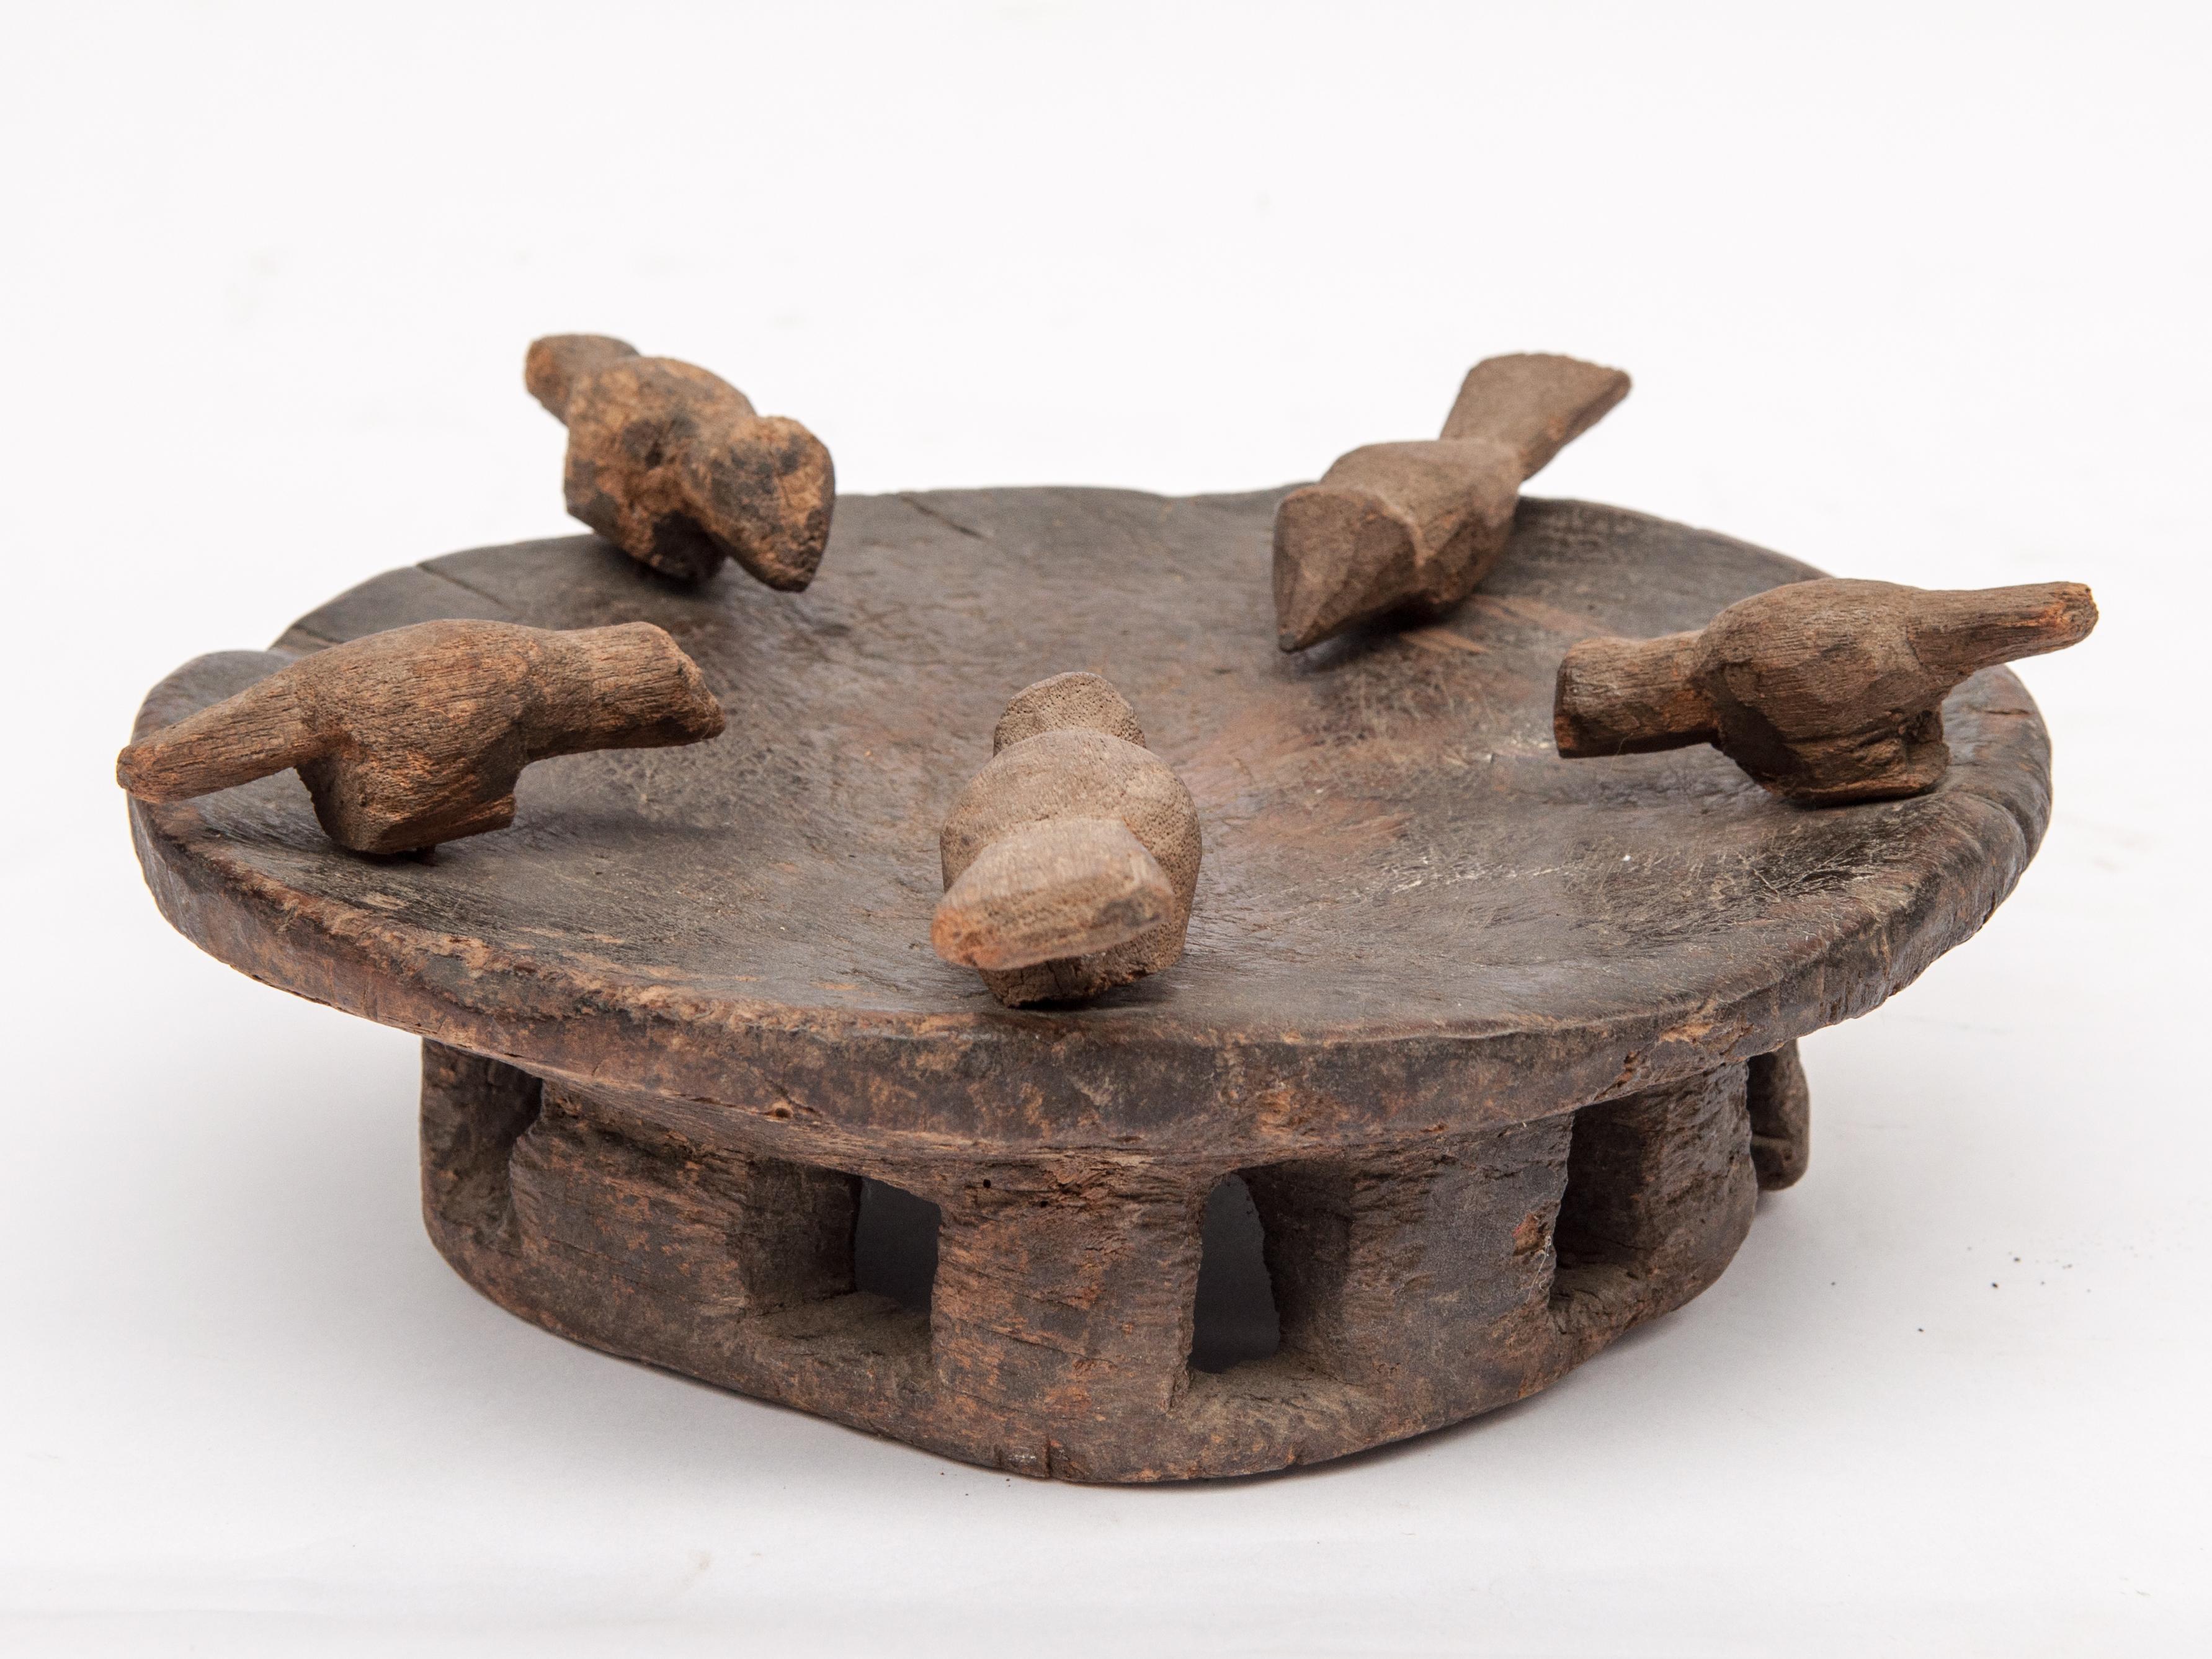 Hand-Crafted Tribal Offering Tray with Birds, Naga of NE India, Early to Mid-20th Century